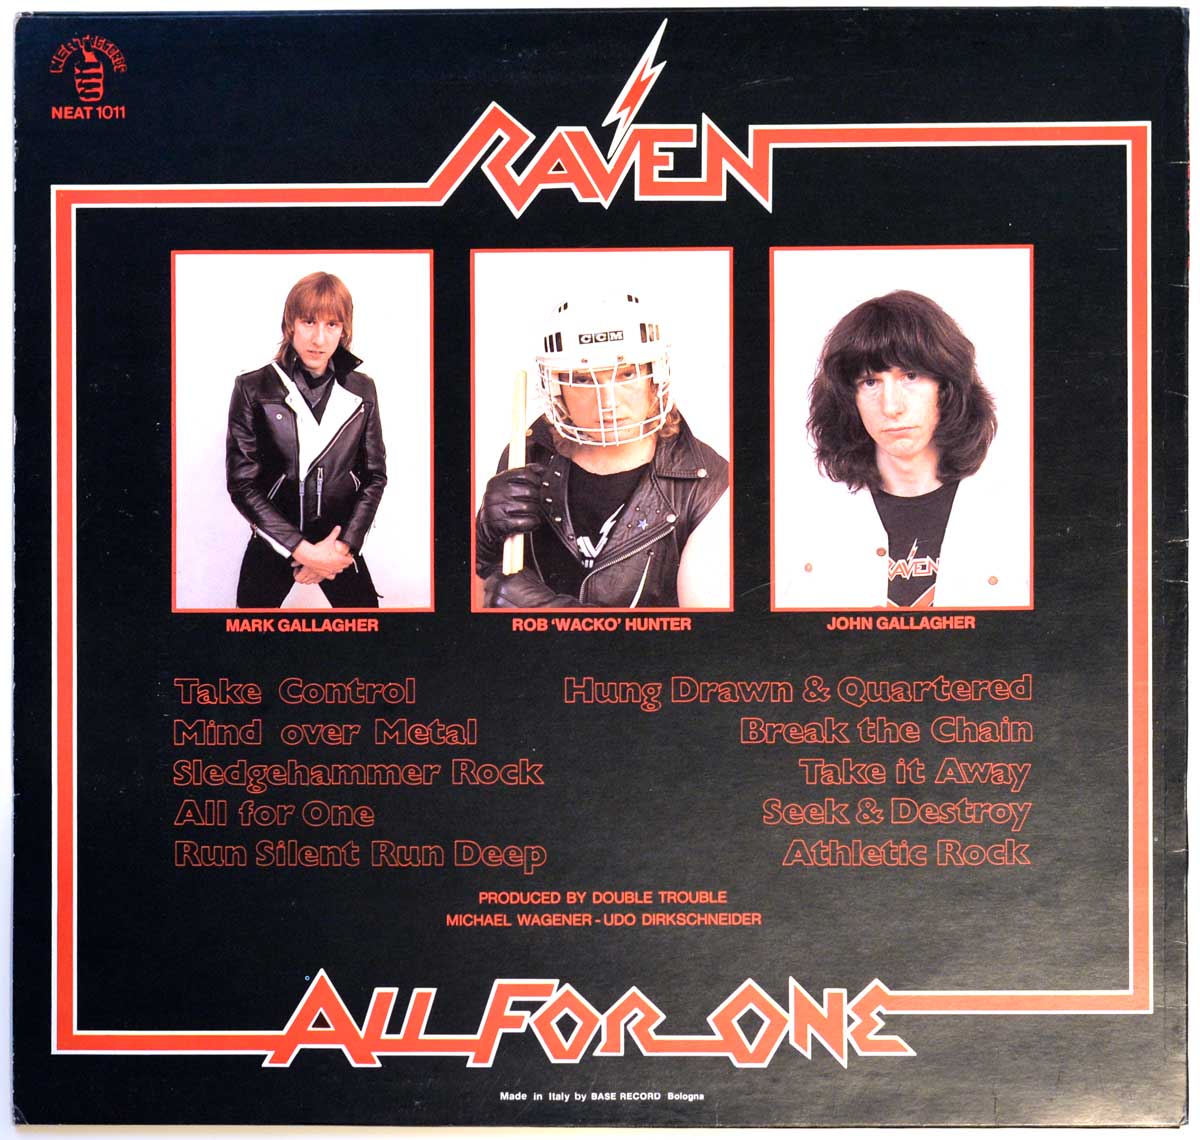 Three Photos of the band-members of "Raven on the Album Back Cover  Photo of "All For One"